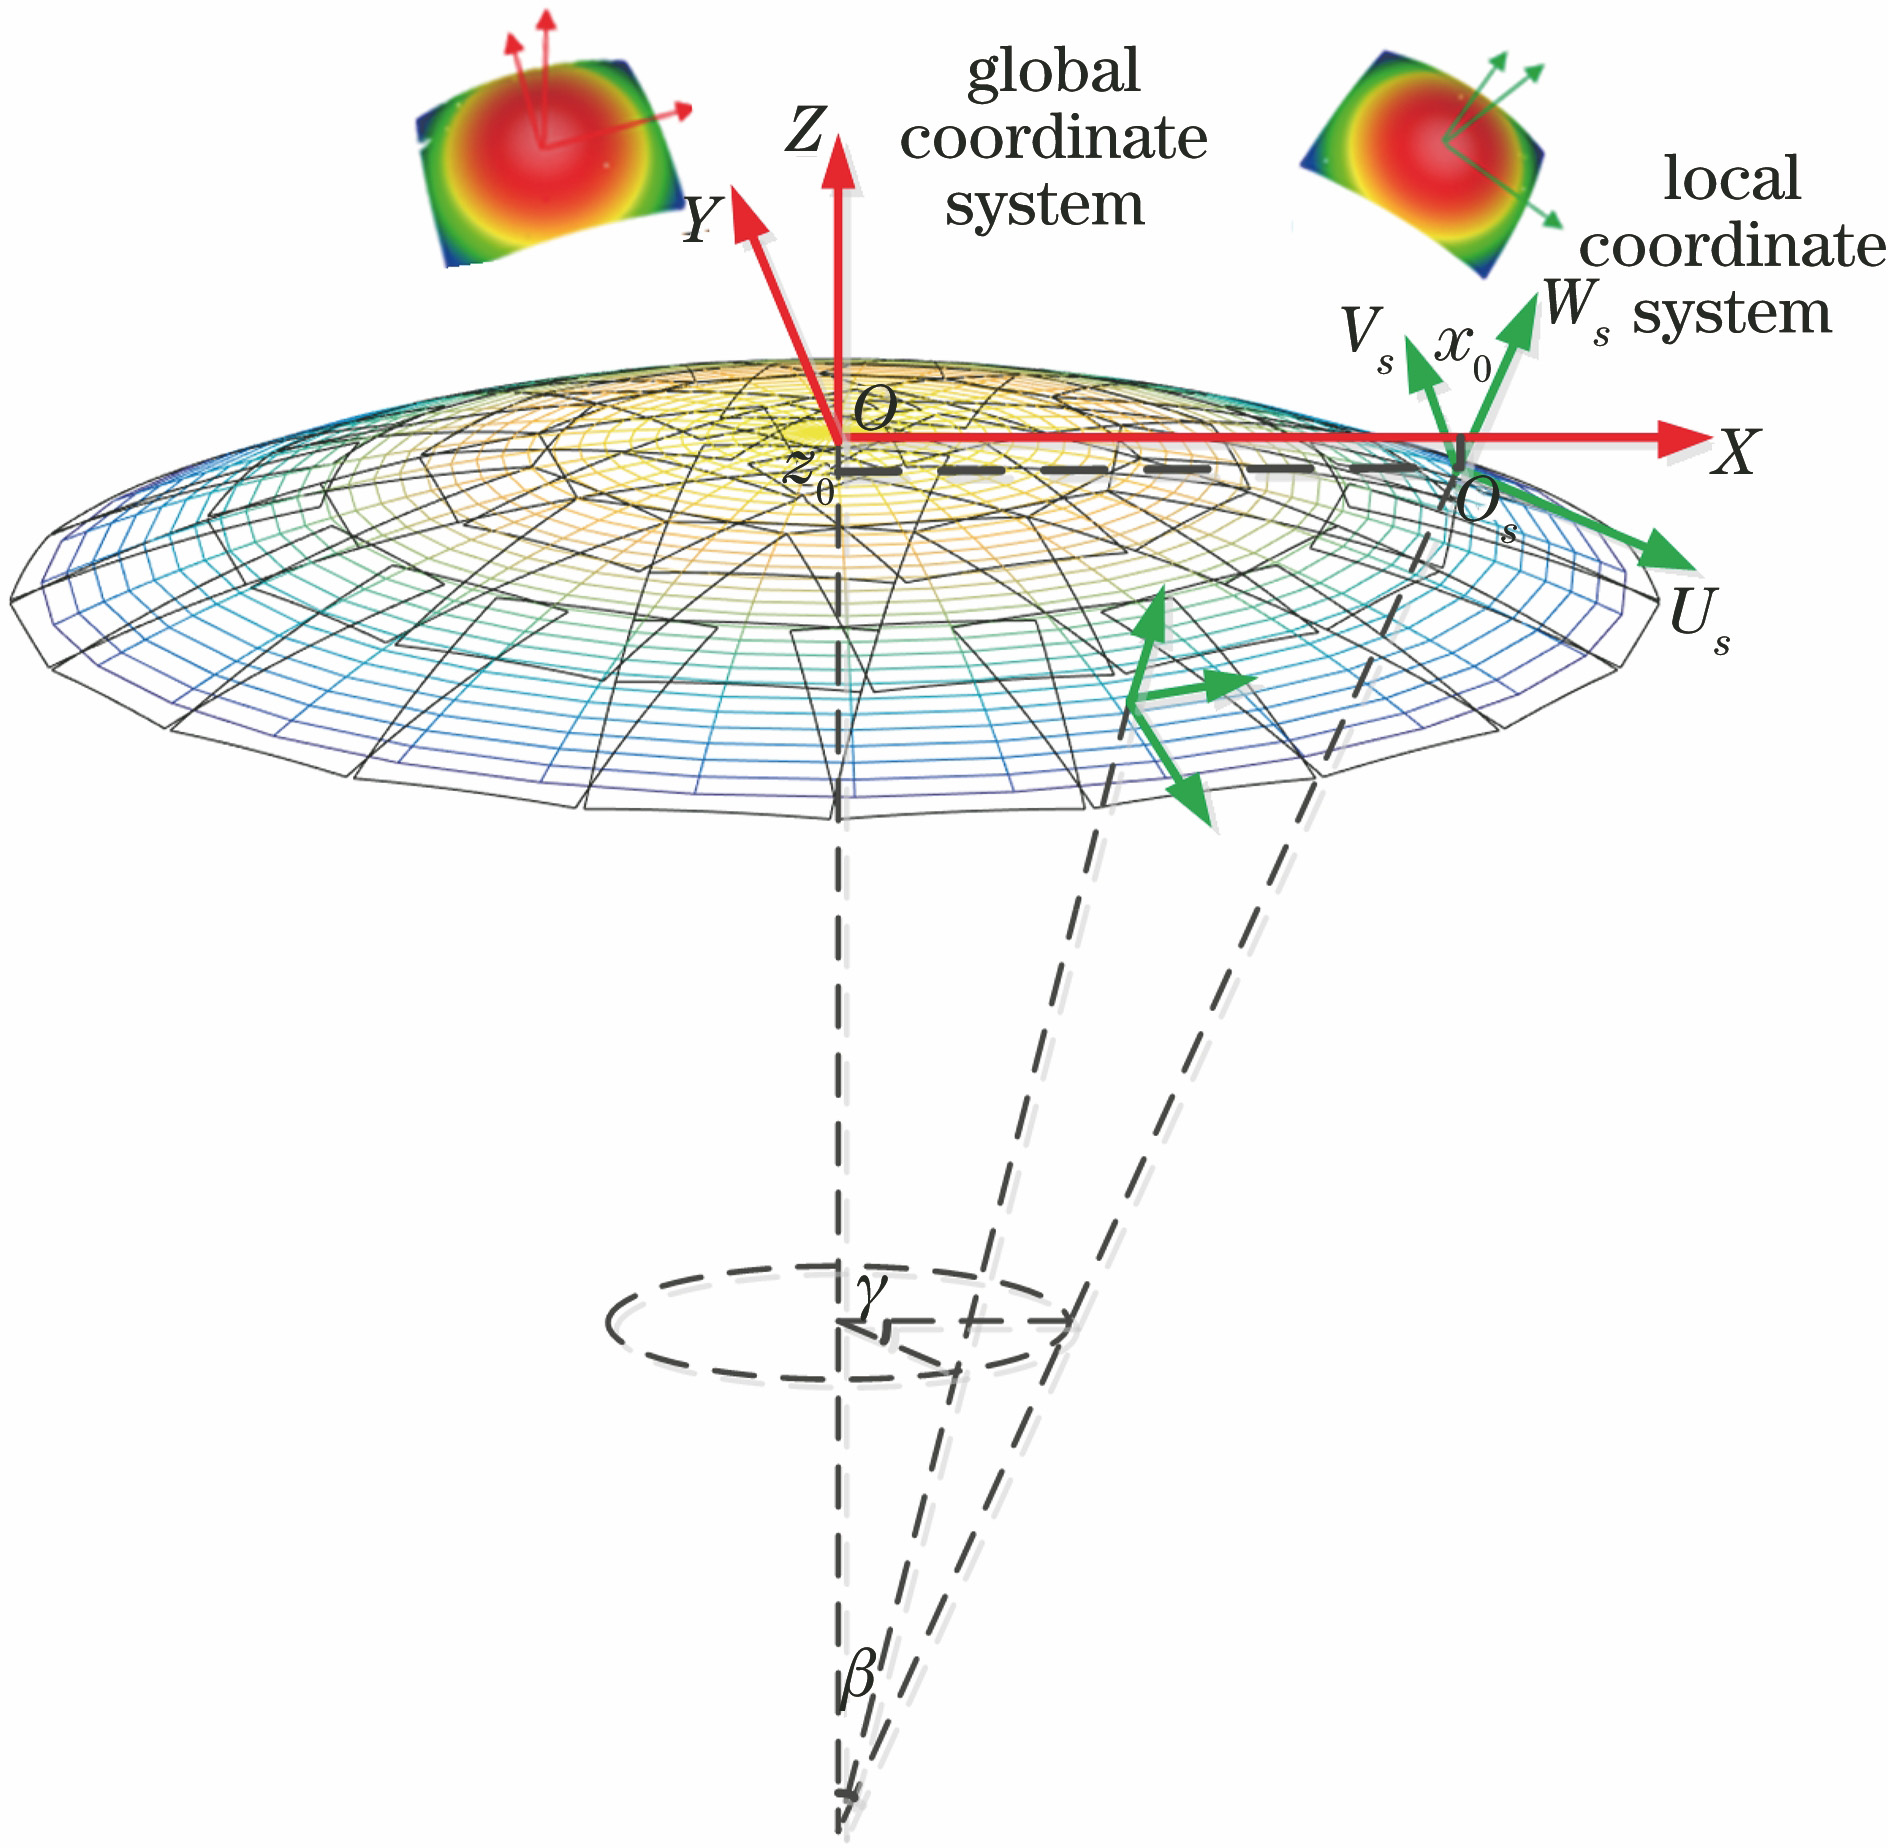 Subaperture division based on transformation between global coordinate system and local coordinate system